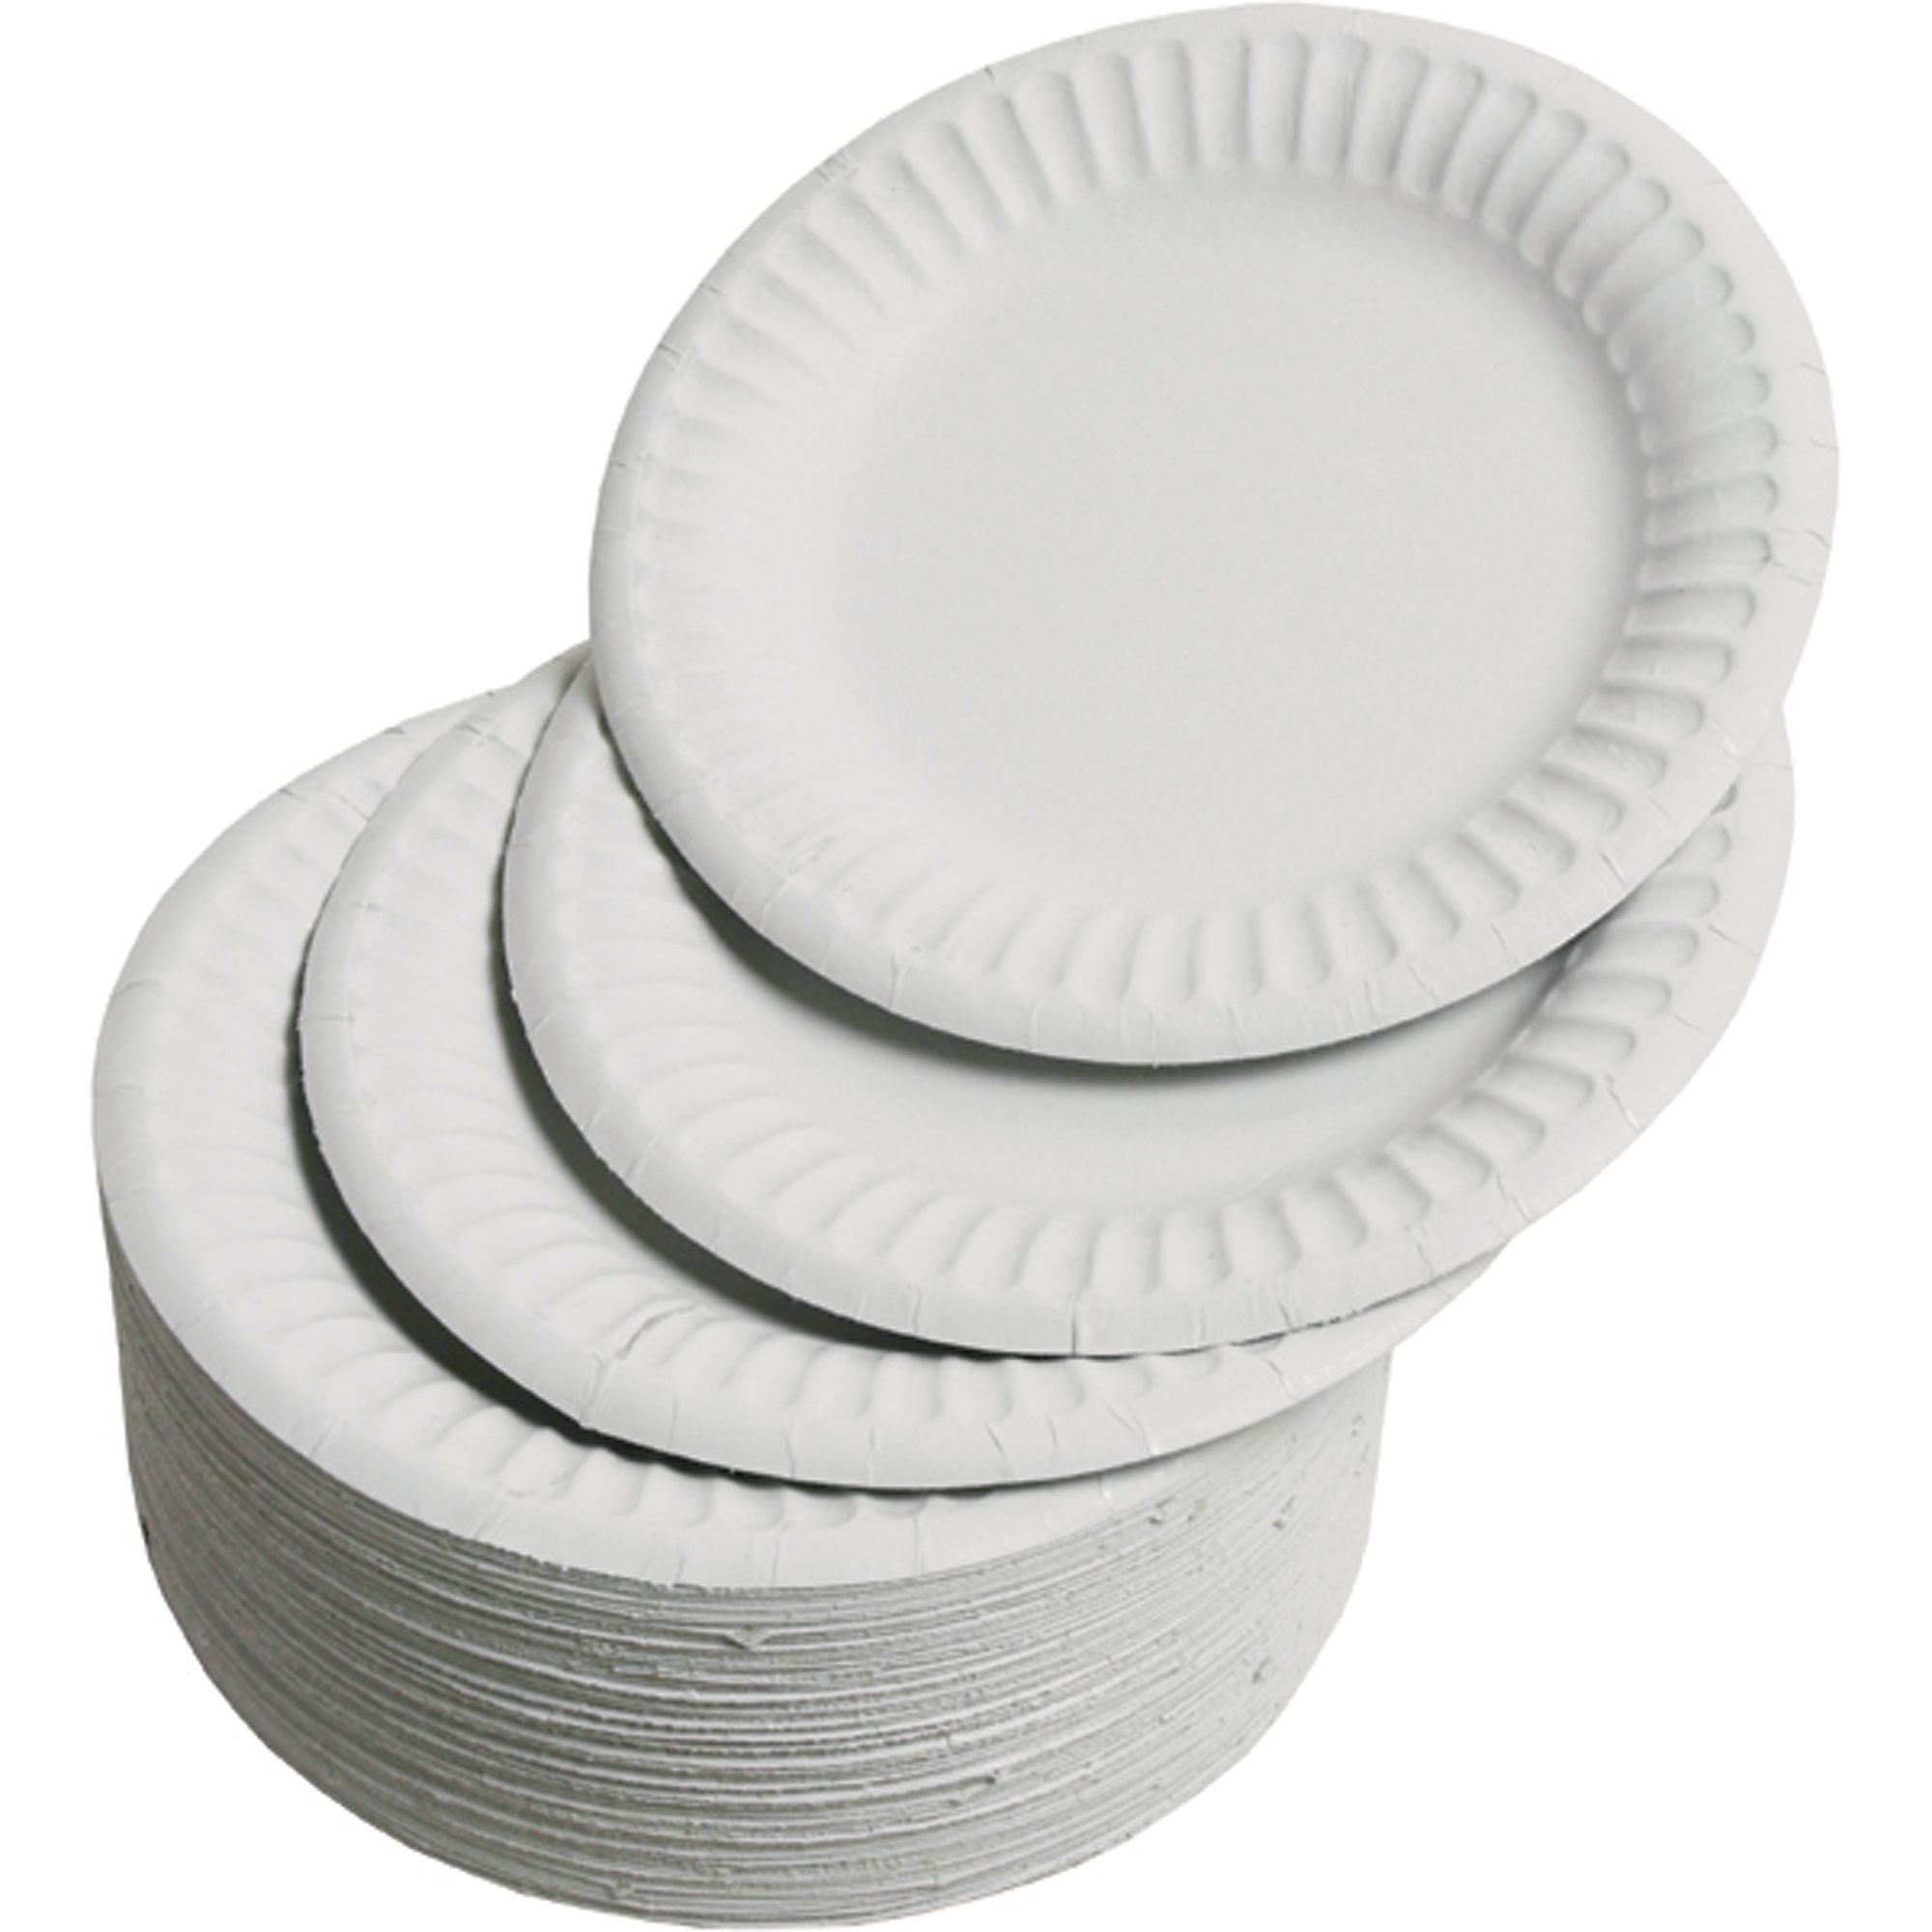 HC469410 - Paper Plates - 180mm - White - Pack of 1000